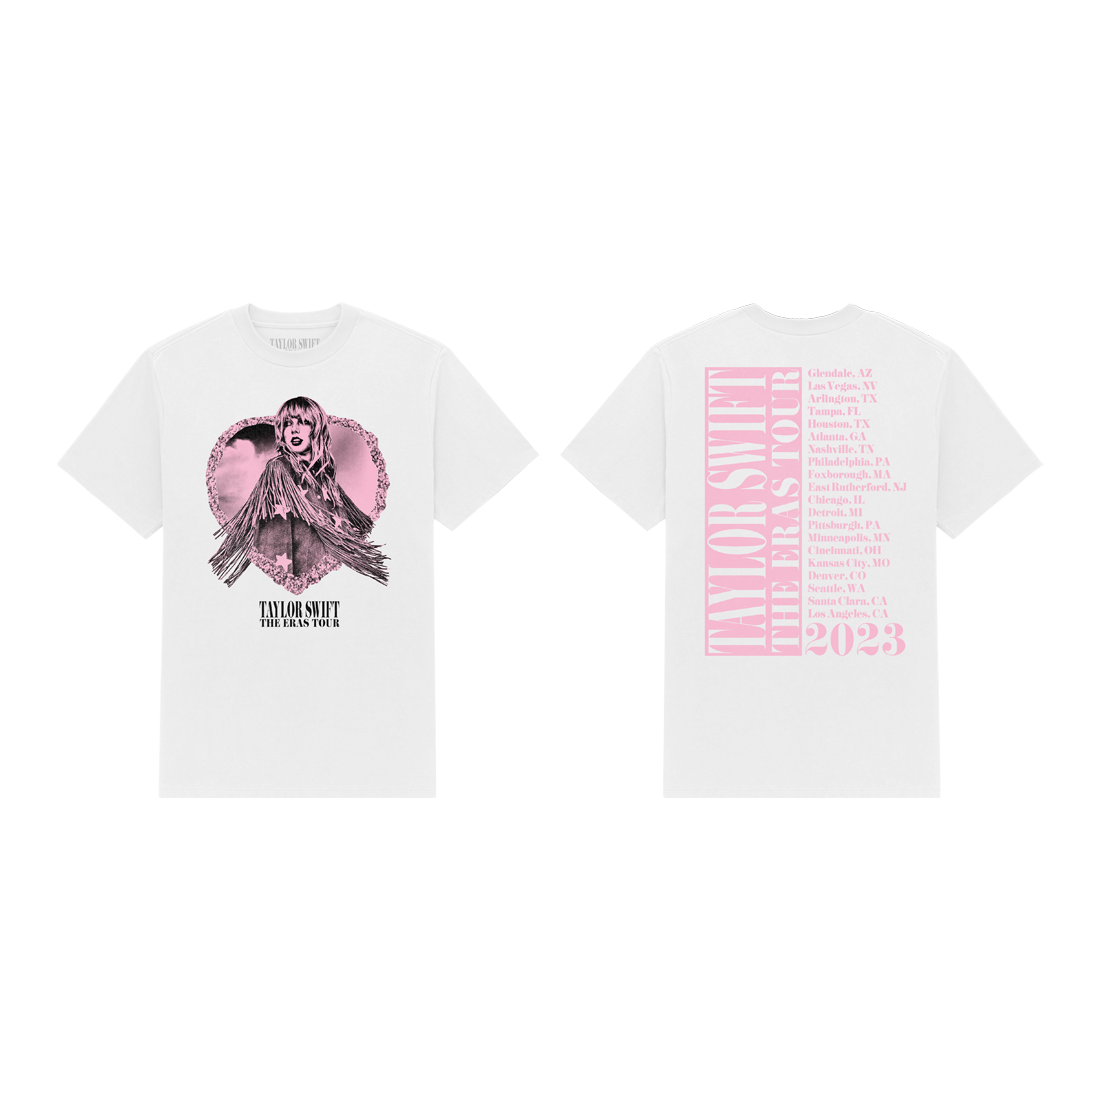 Taylor Swift | The Eras Tour Lover Album T-Shirt Front and Back